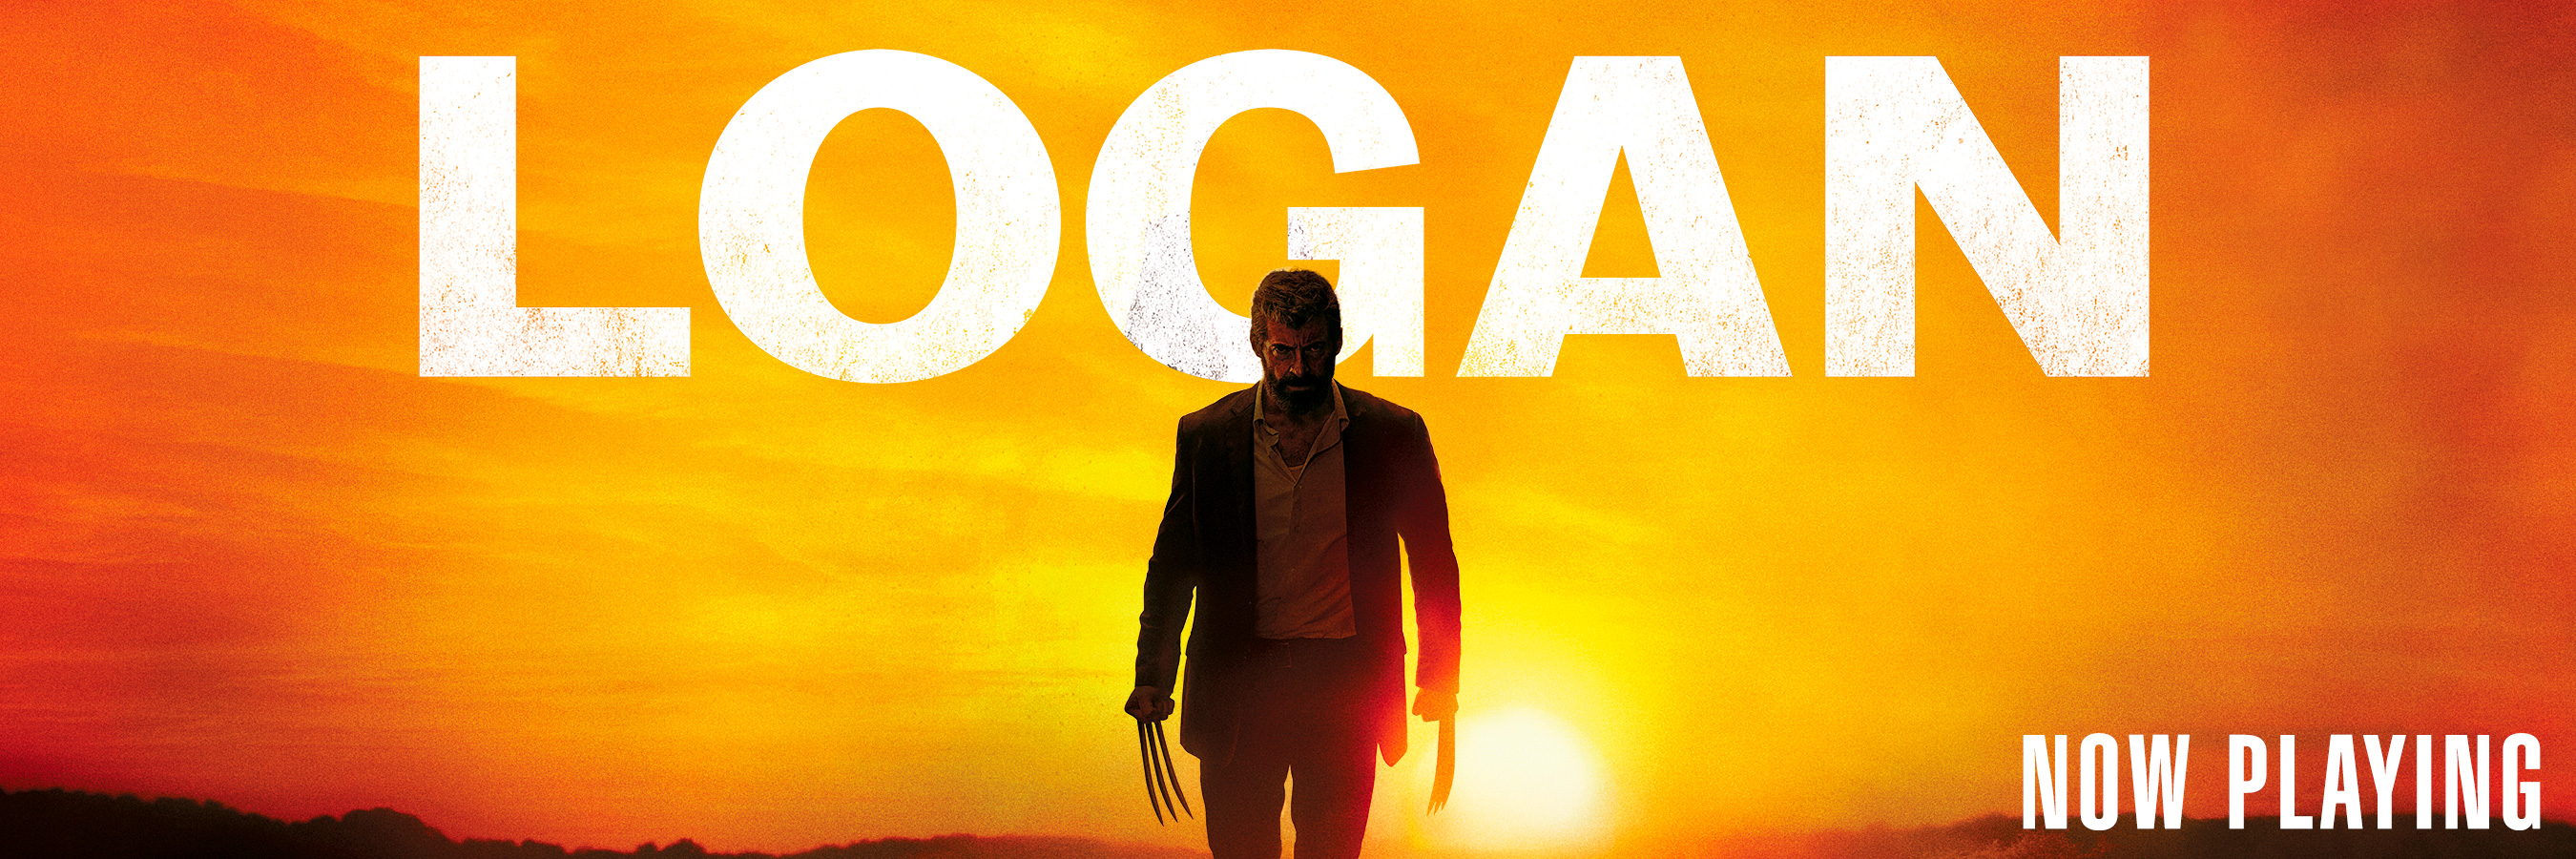 logan-now-playing-desktop-v2-front-main-stage.png